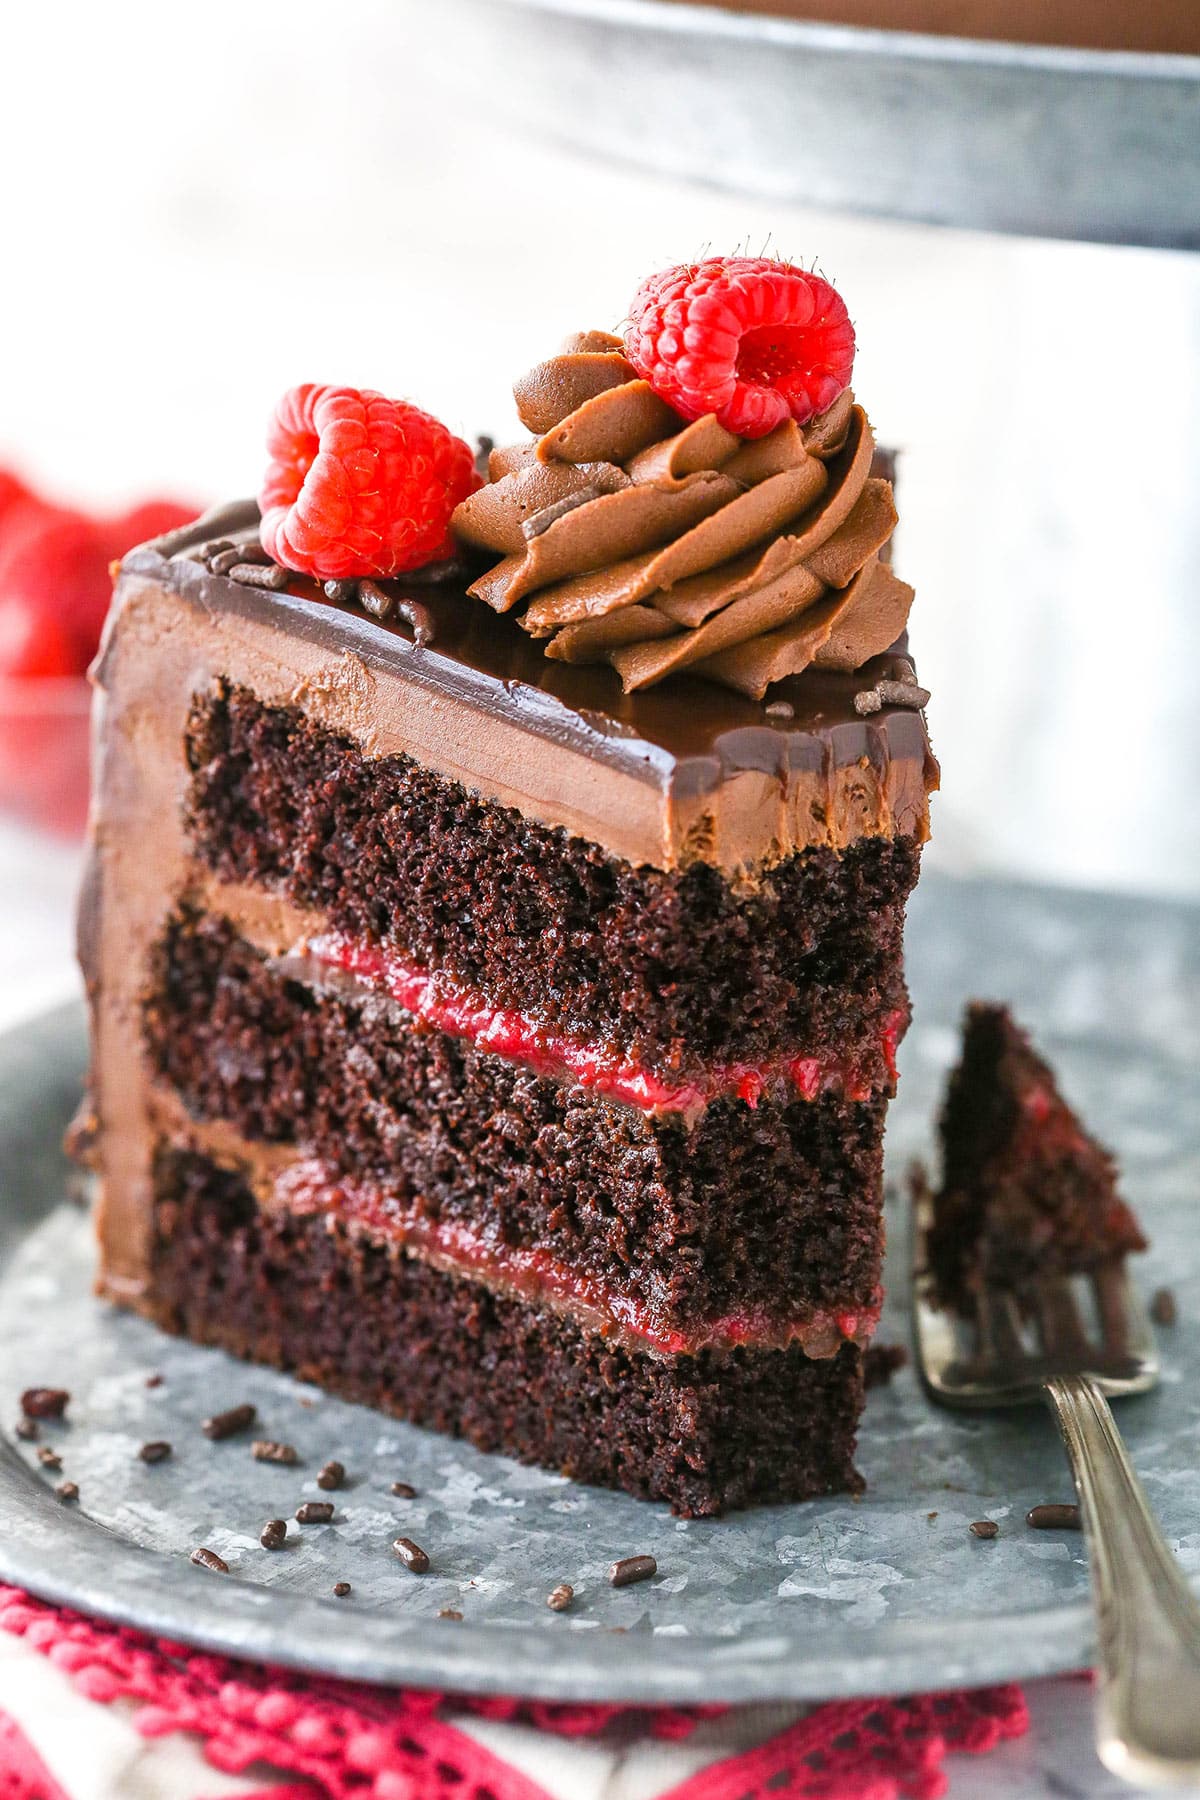 A slice of chocolate raspberry layer cake on a plate with a fork taking a bite out of it.